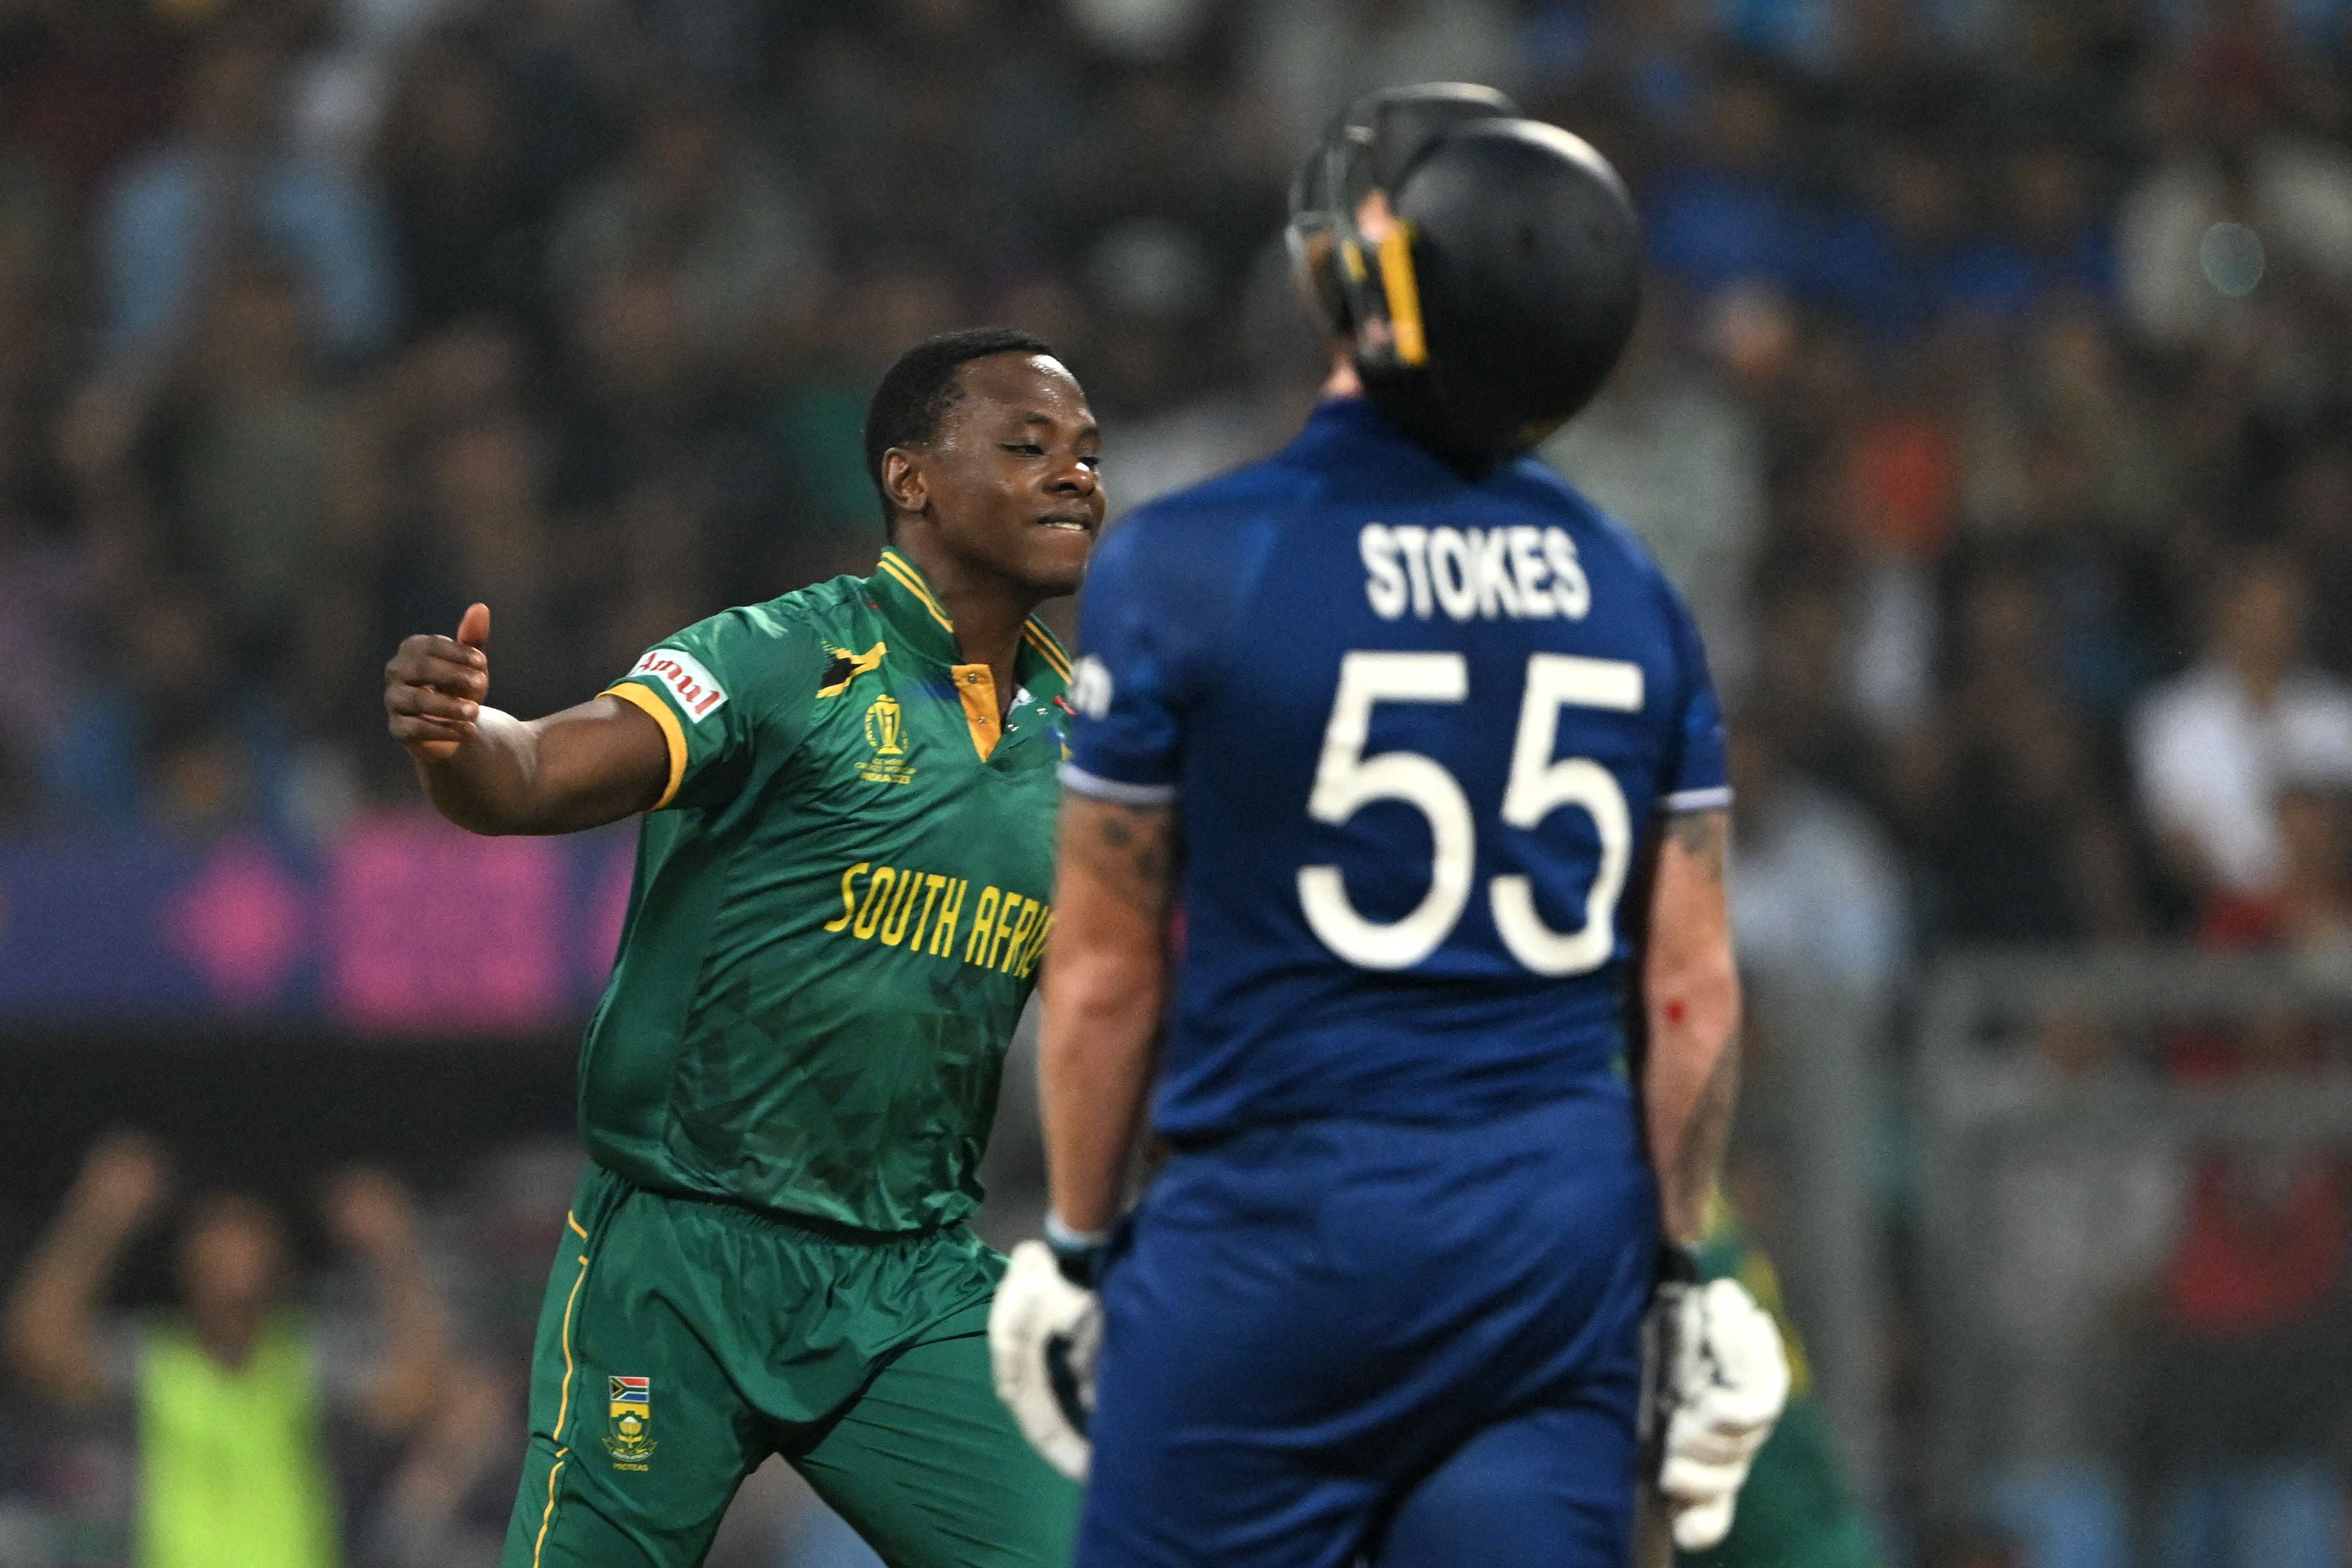 South Africa's Kagiso Rabada celebrates after taking the wicket of England's Ben Stokes (R) during the 2023 ICC Men's Cricket World Cup one-day international (ODI) match between England and South Africa